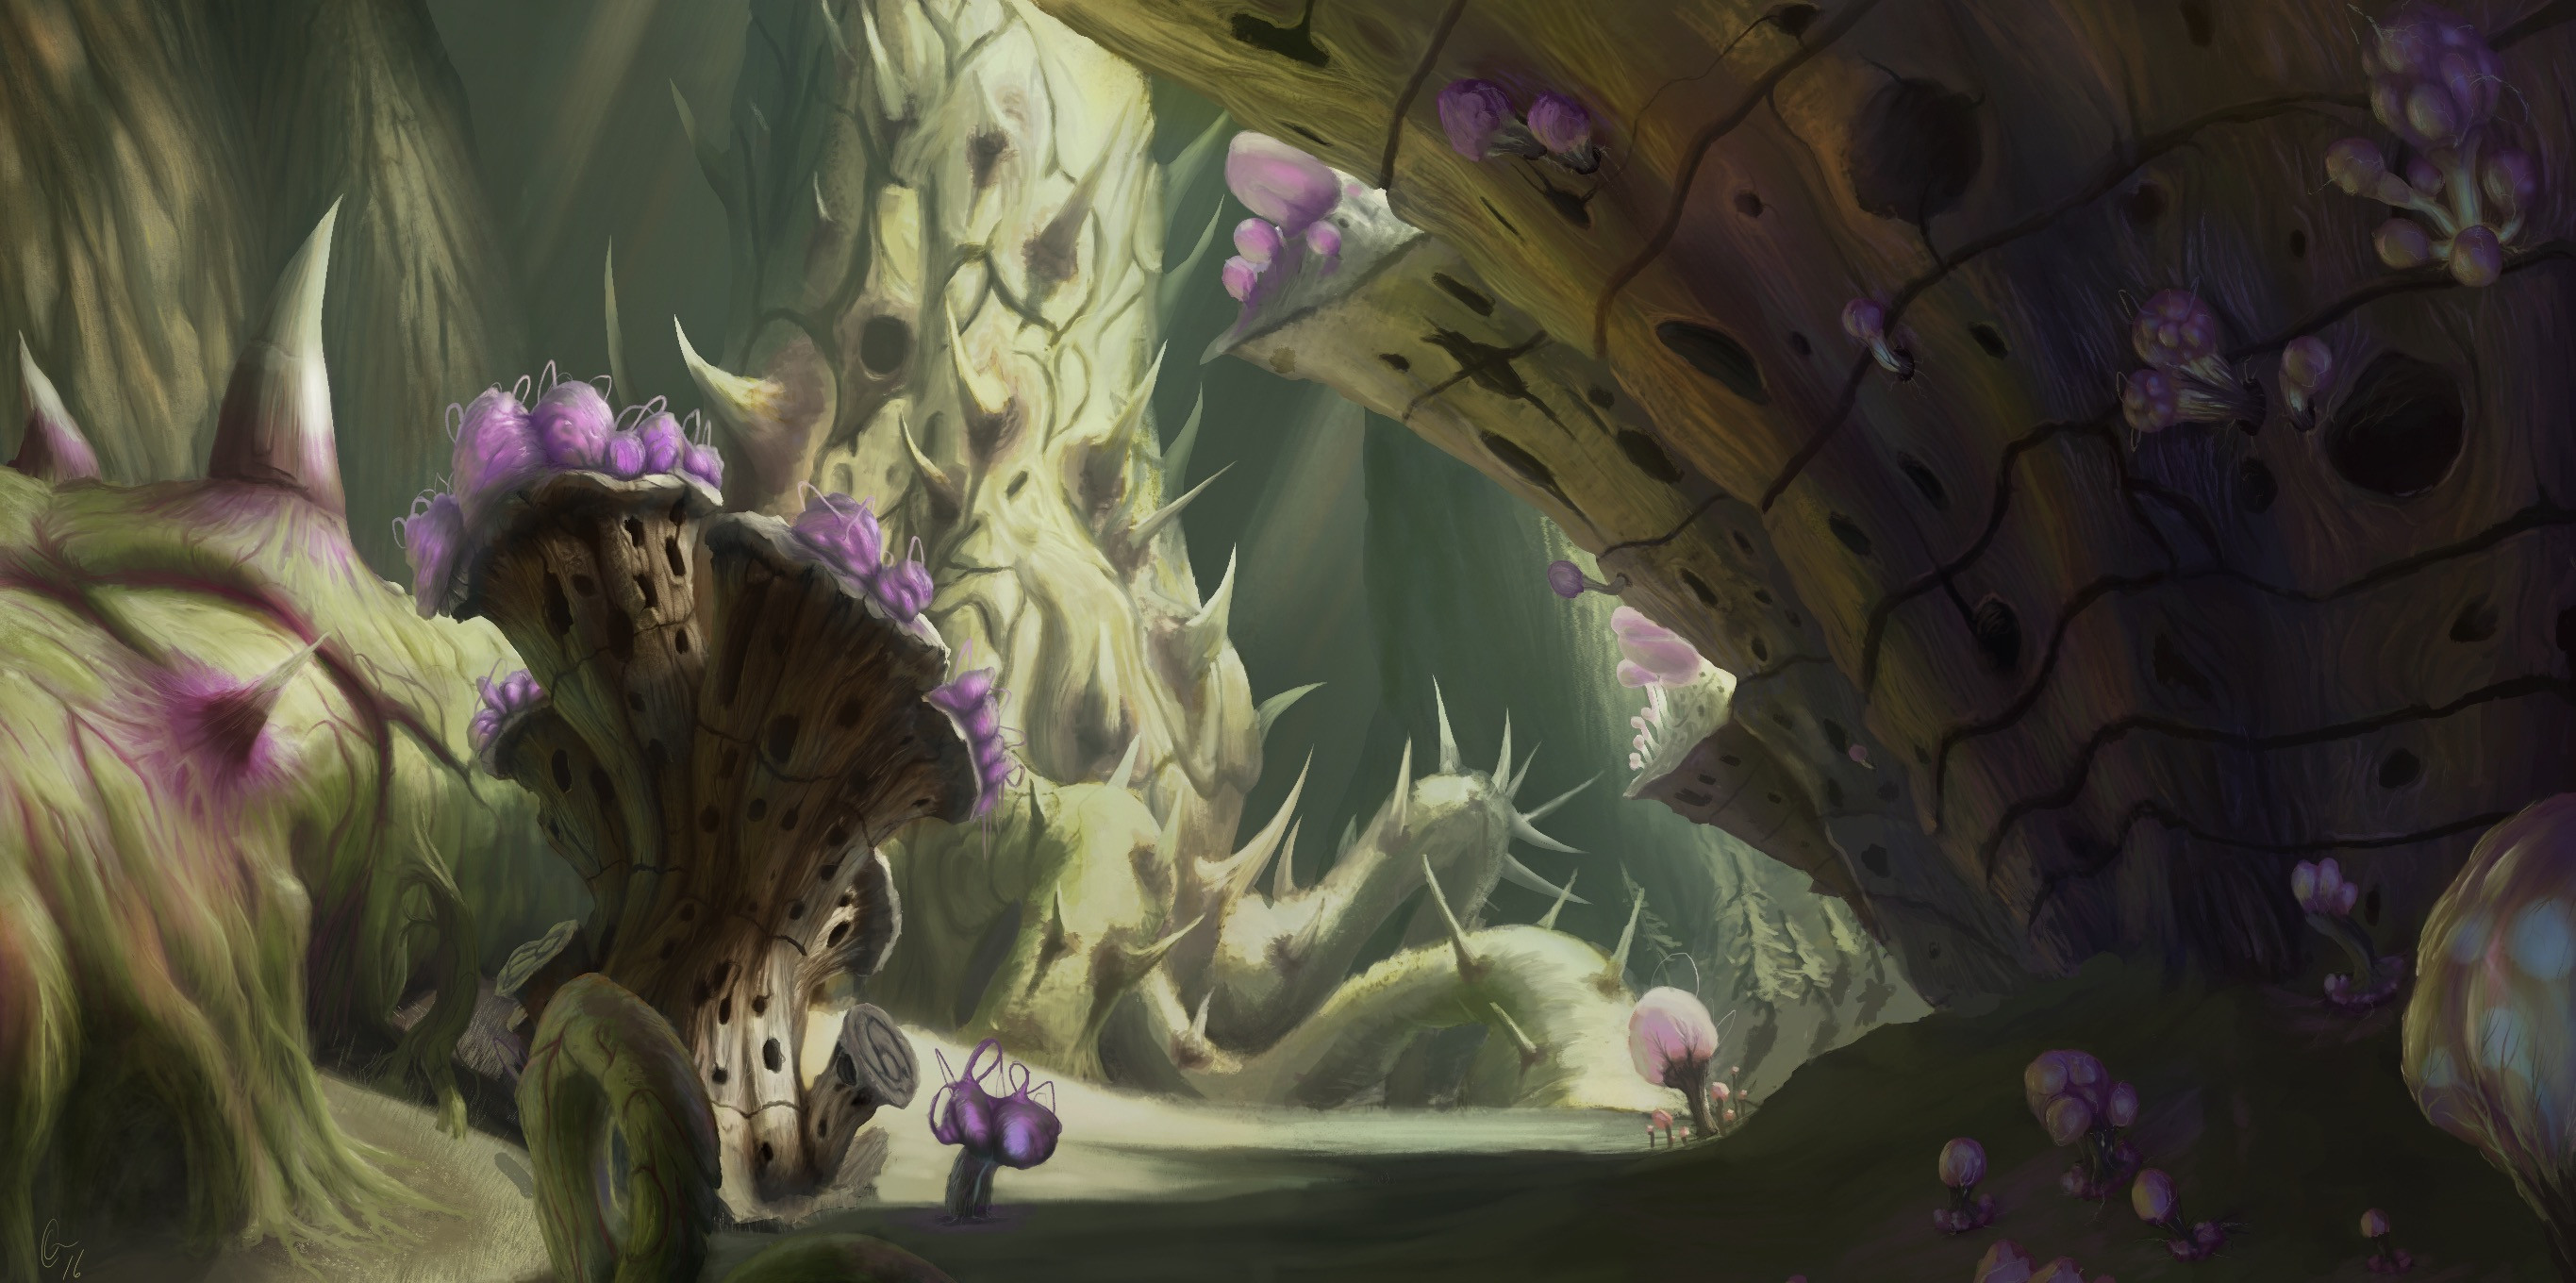 Environment Sketch of Calcified fungi